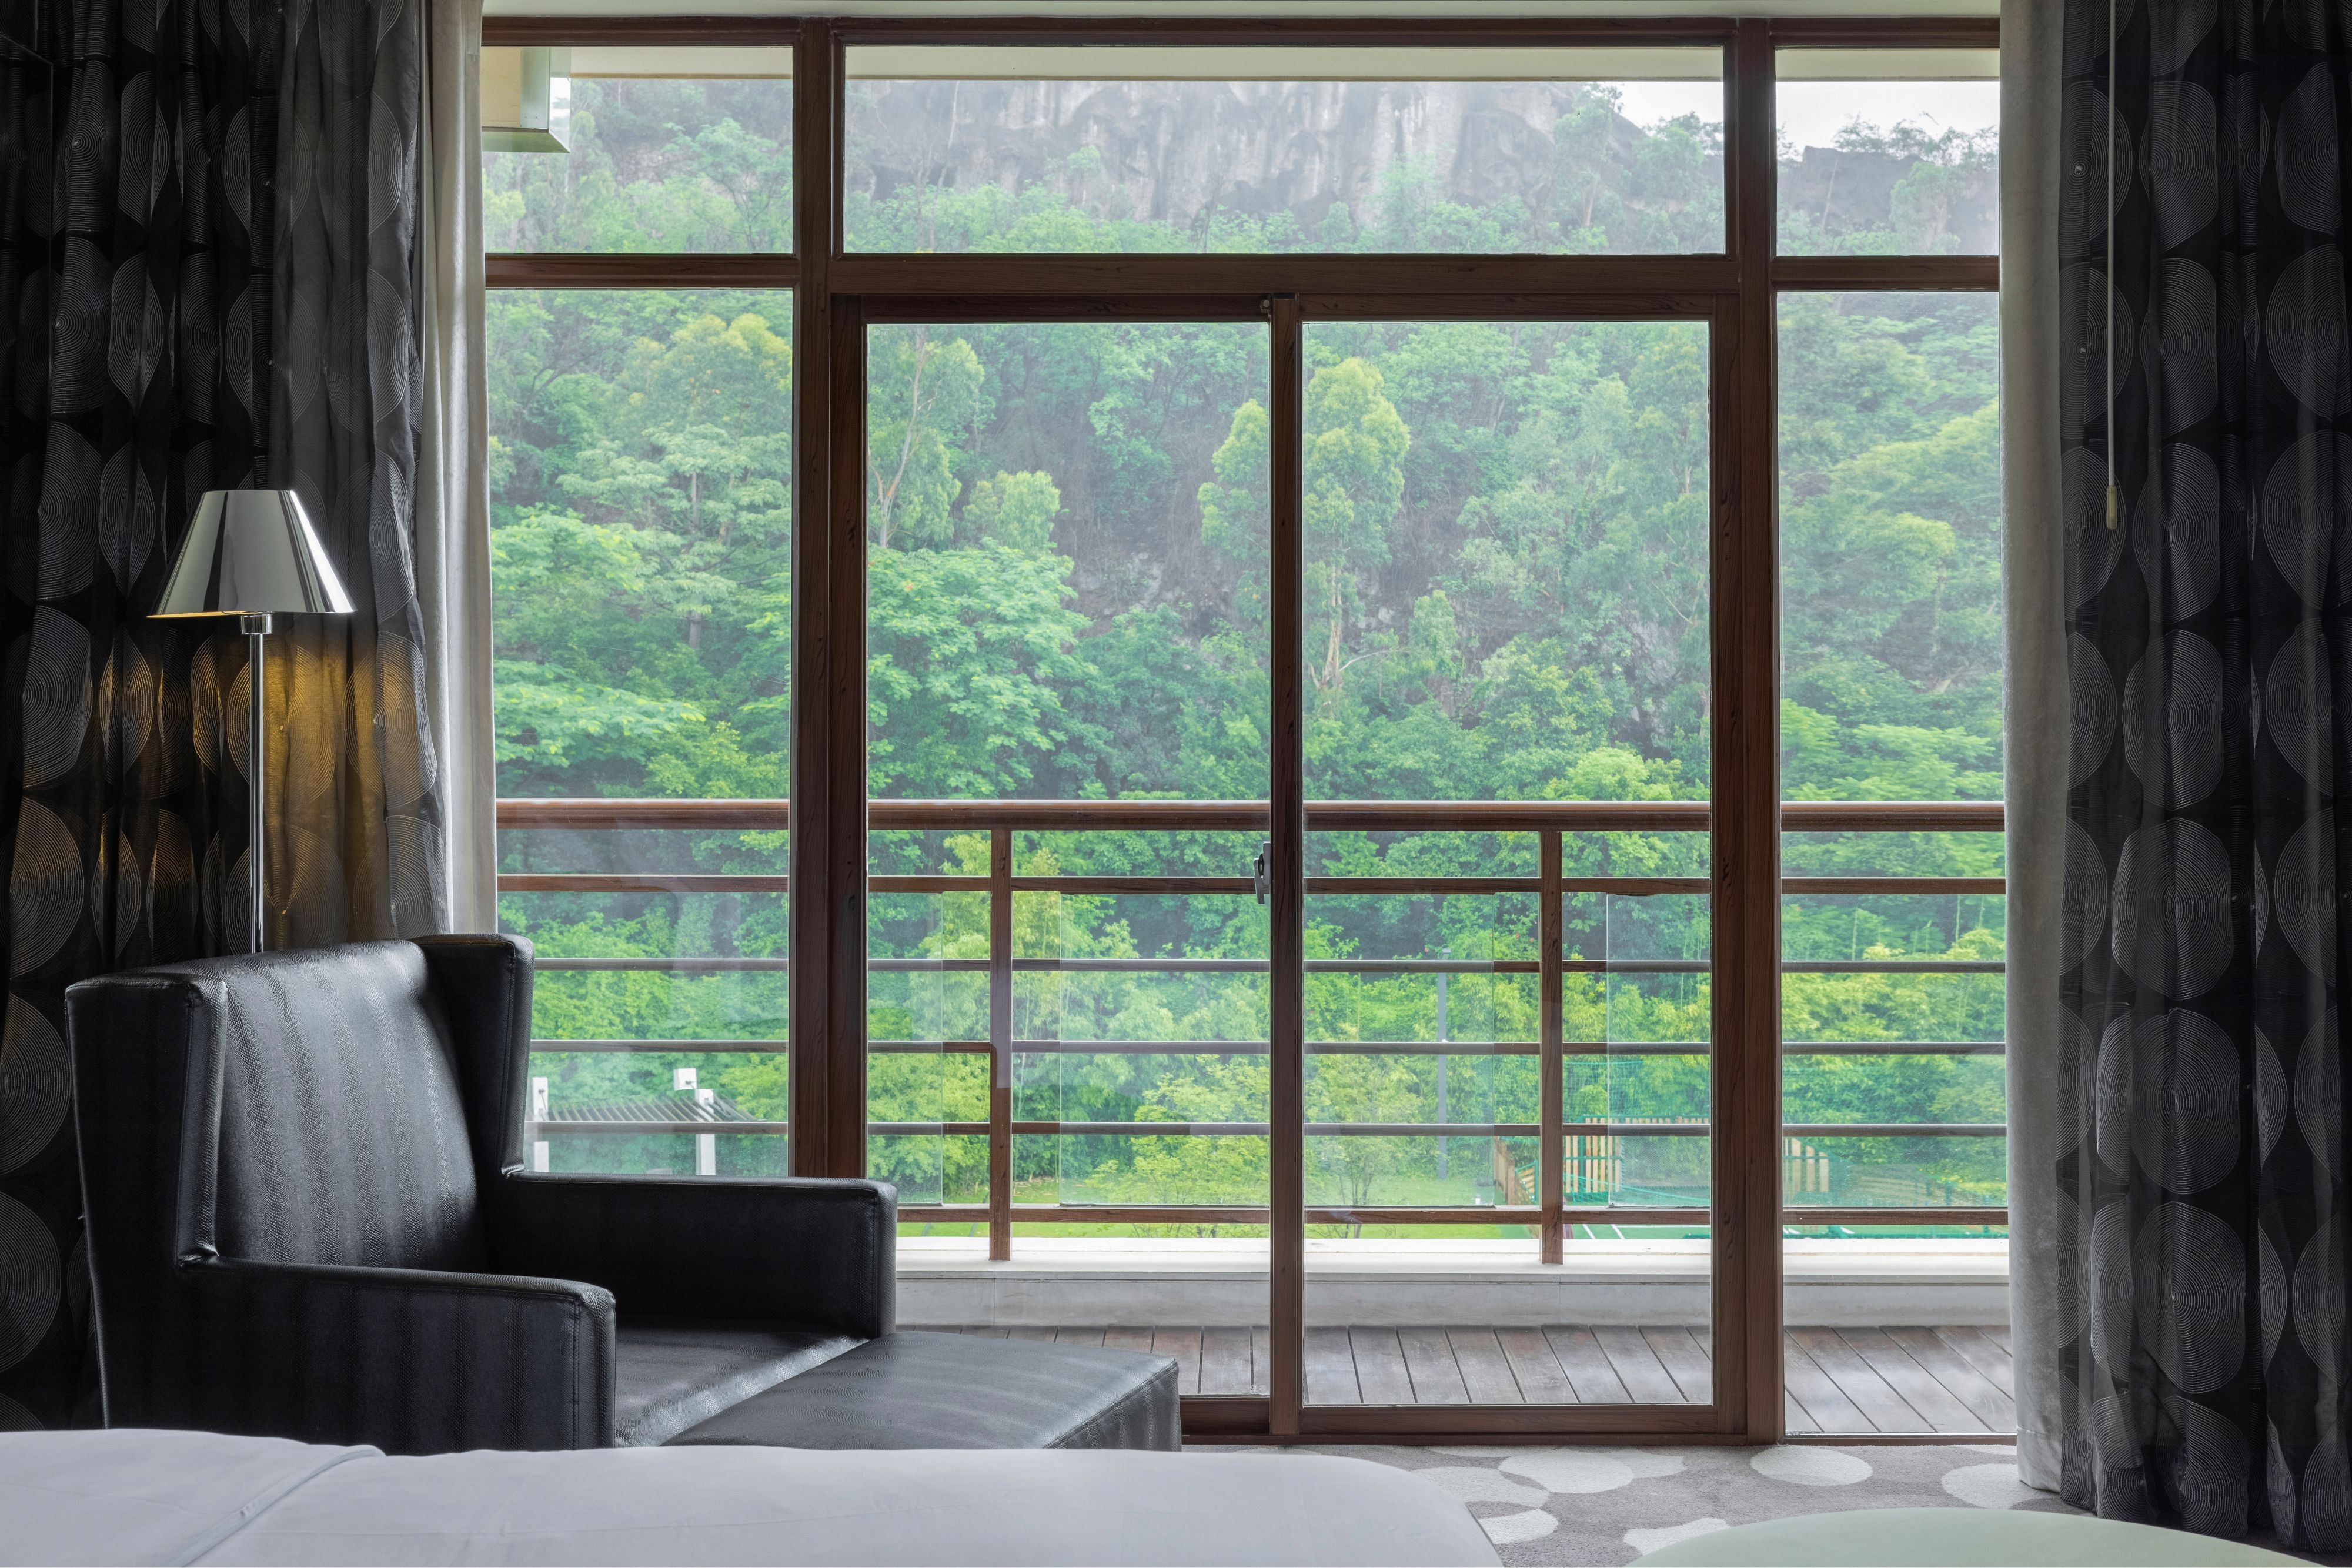 Guest Room Balcony with View